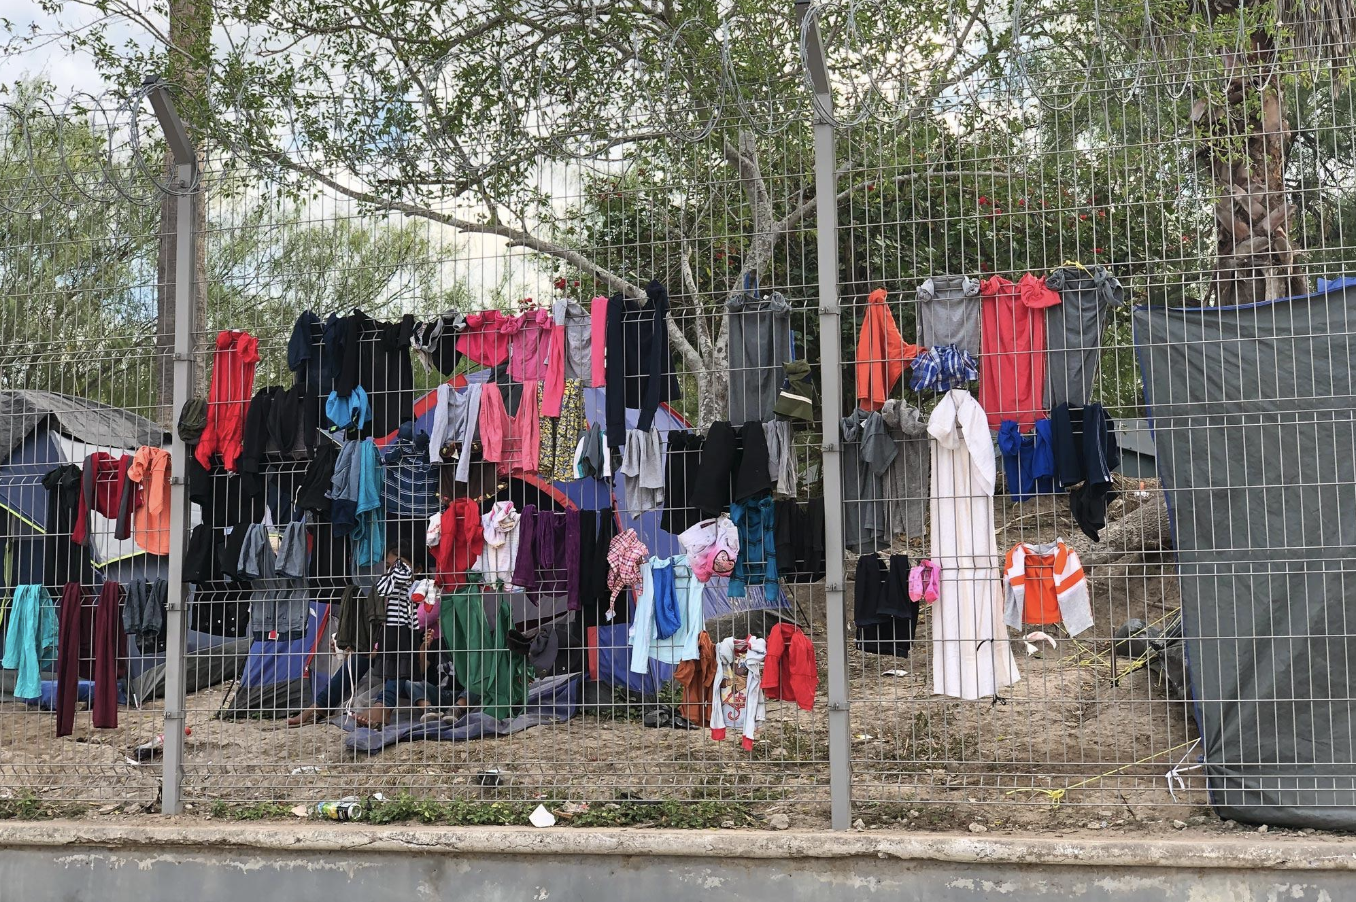 About 3,000 asylum-seekers are currently living in a makeshift refugee camp in Matamoros, Mexico, while their immigration cases are processed in the U.S. (Photo courtesy Lucy Bassett)